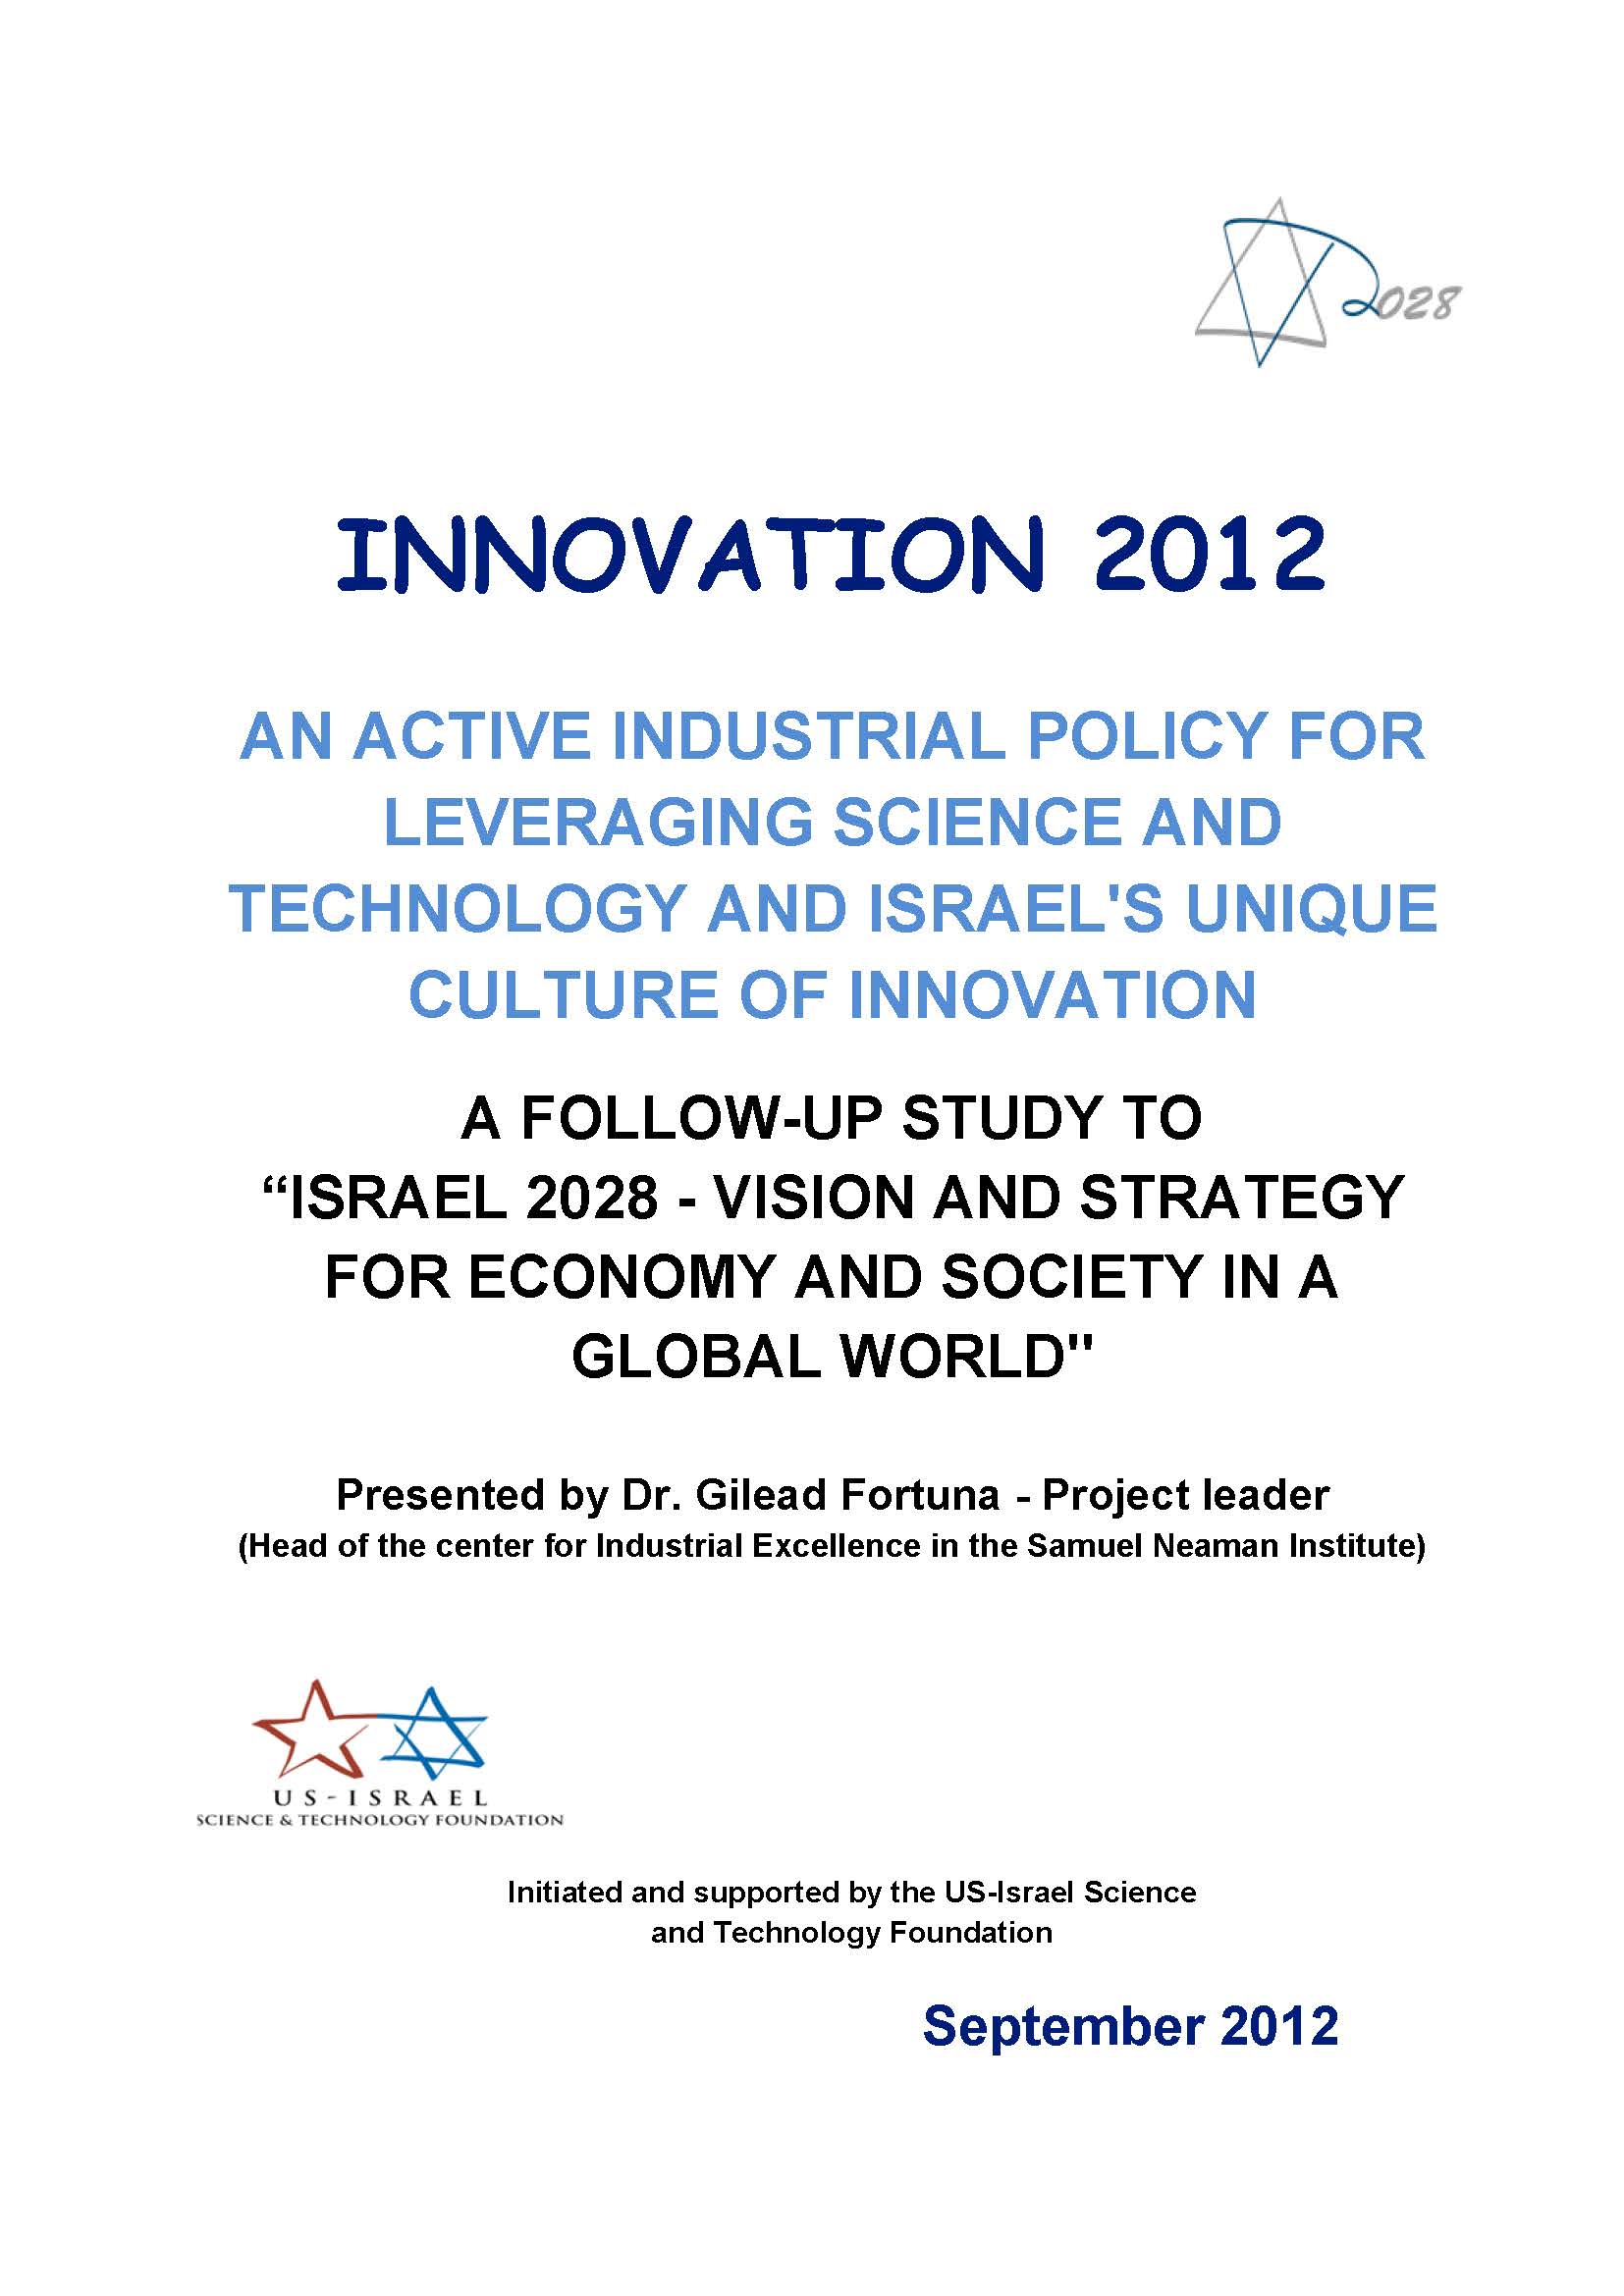 Innovation 2012 An active industrial policy for leveraging science and technology and Israel’s unique culture of innovation